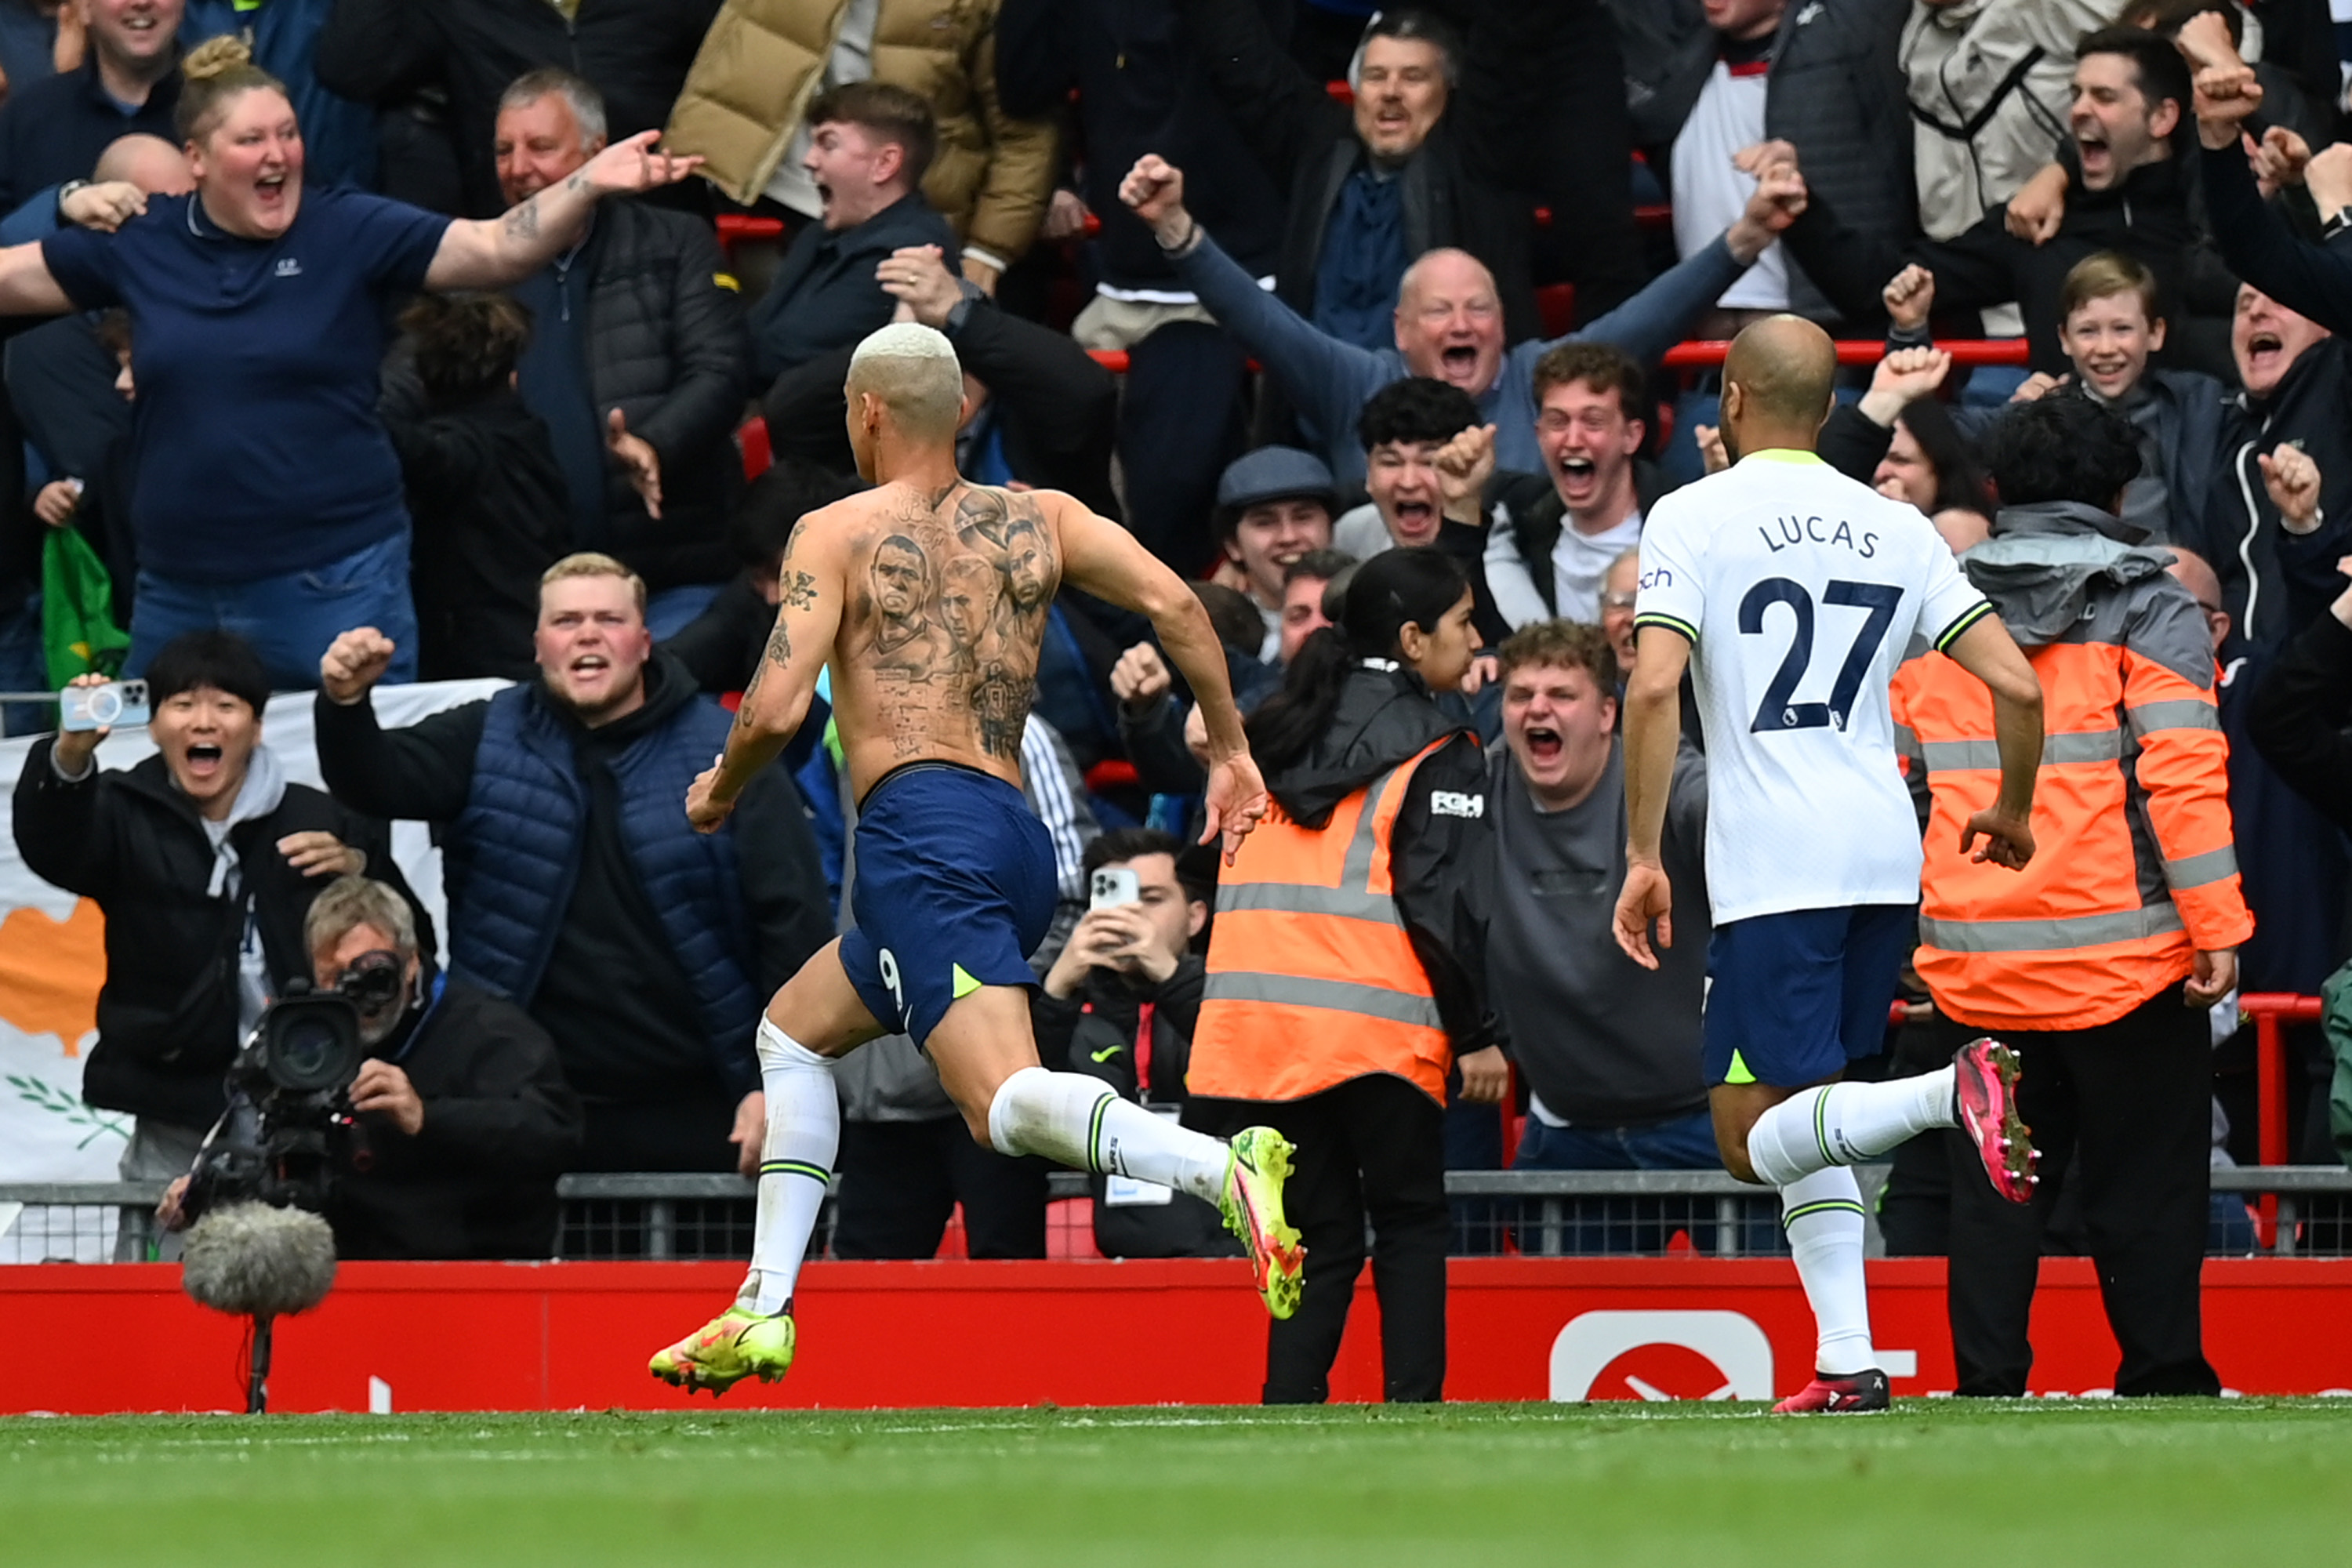 Richarlison of Tottenham Hotspur celebrates after scoring the team’s third goal during the Premier League match between Liverpool FC and Tottenham Hotspur at Anfield on April 30, 2023 in Liverpool, England. This goal did not bring Tottenham any points.